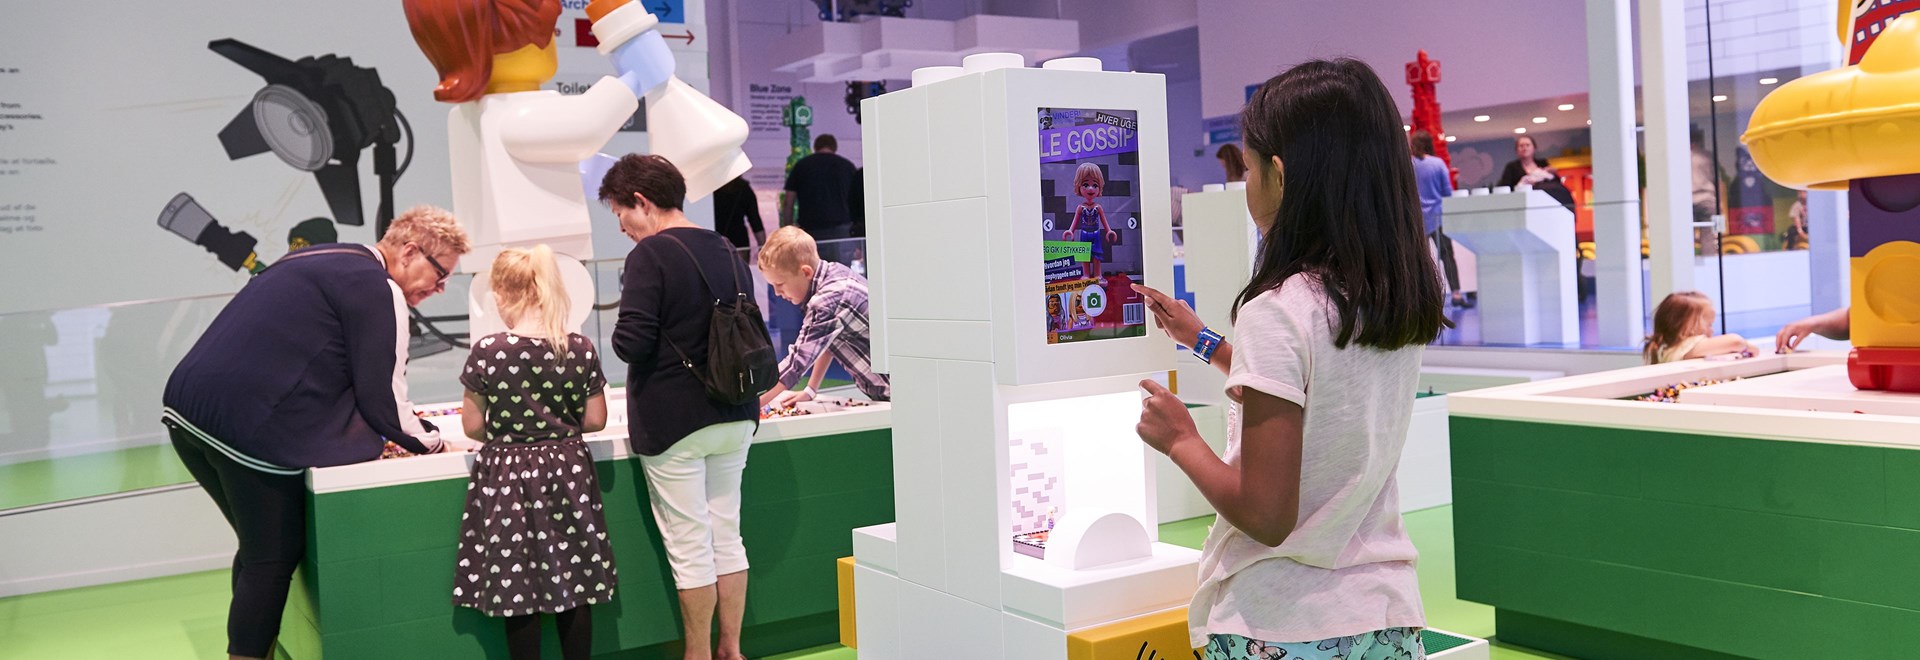 Scan your wristband and bring your LEGO to life